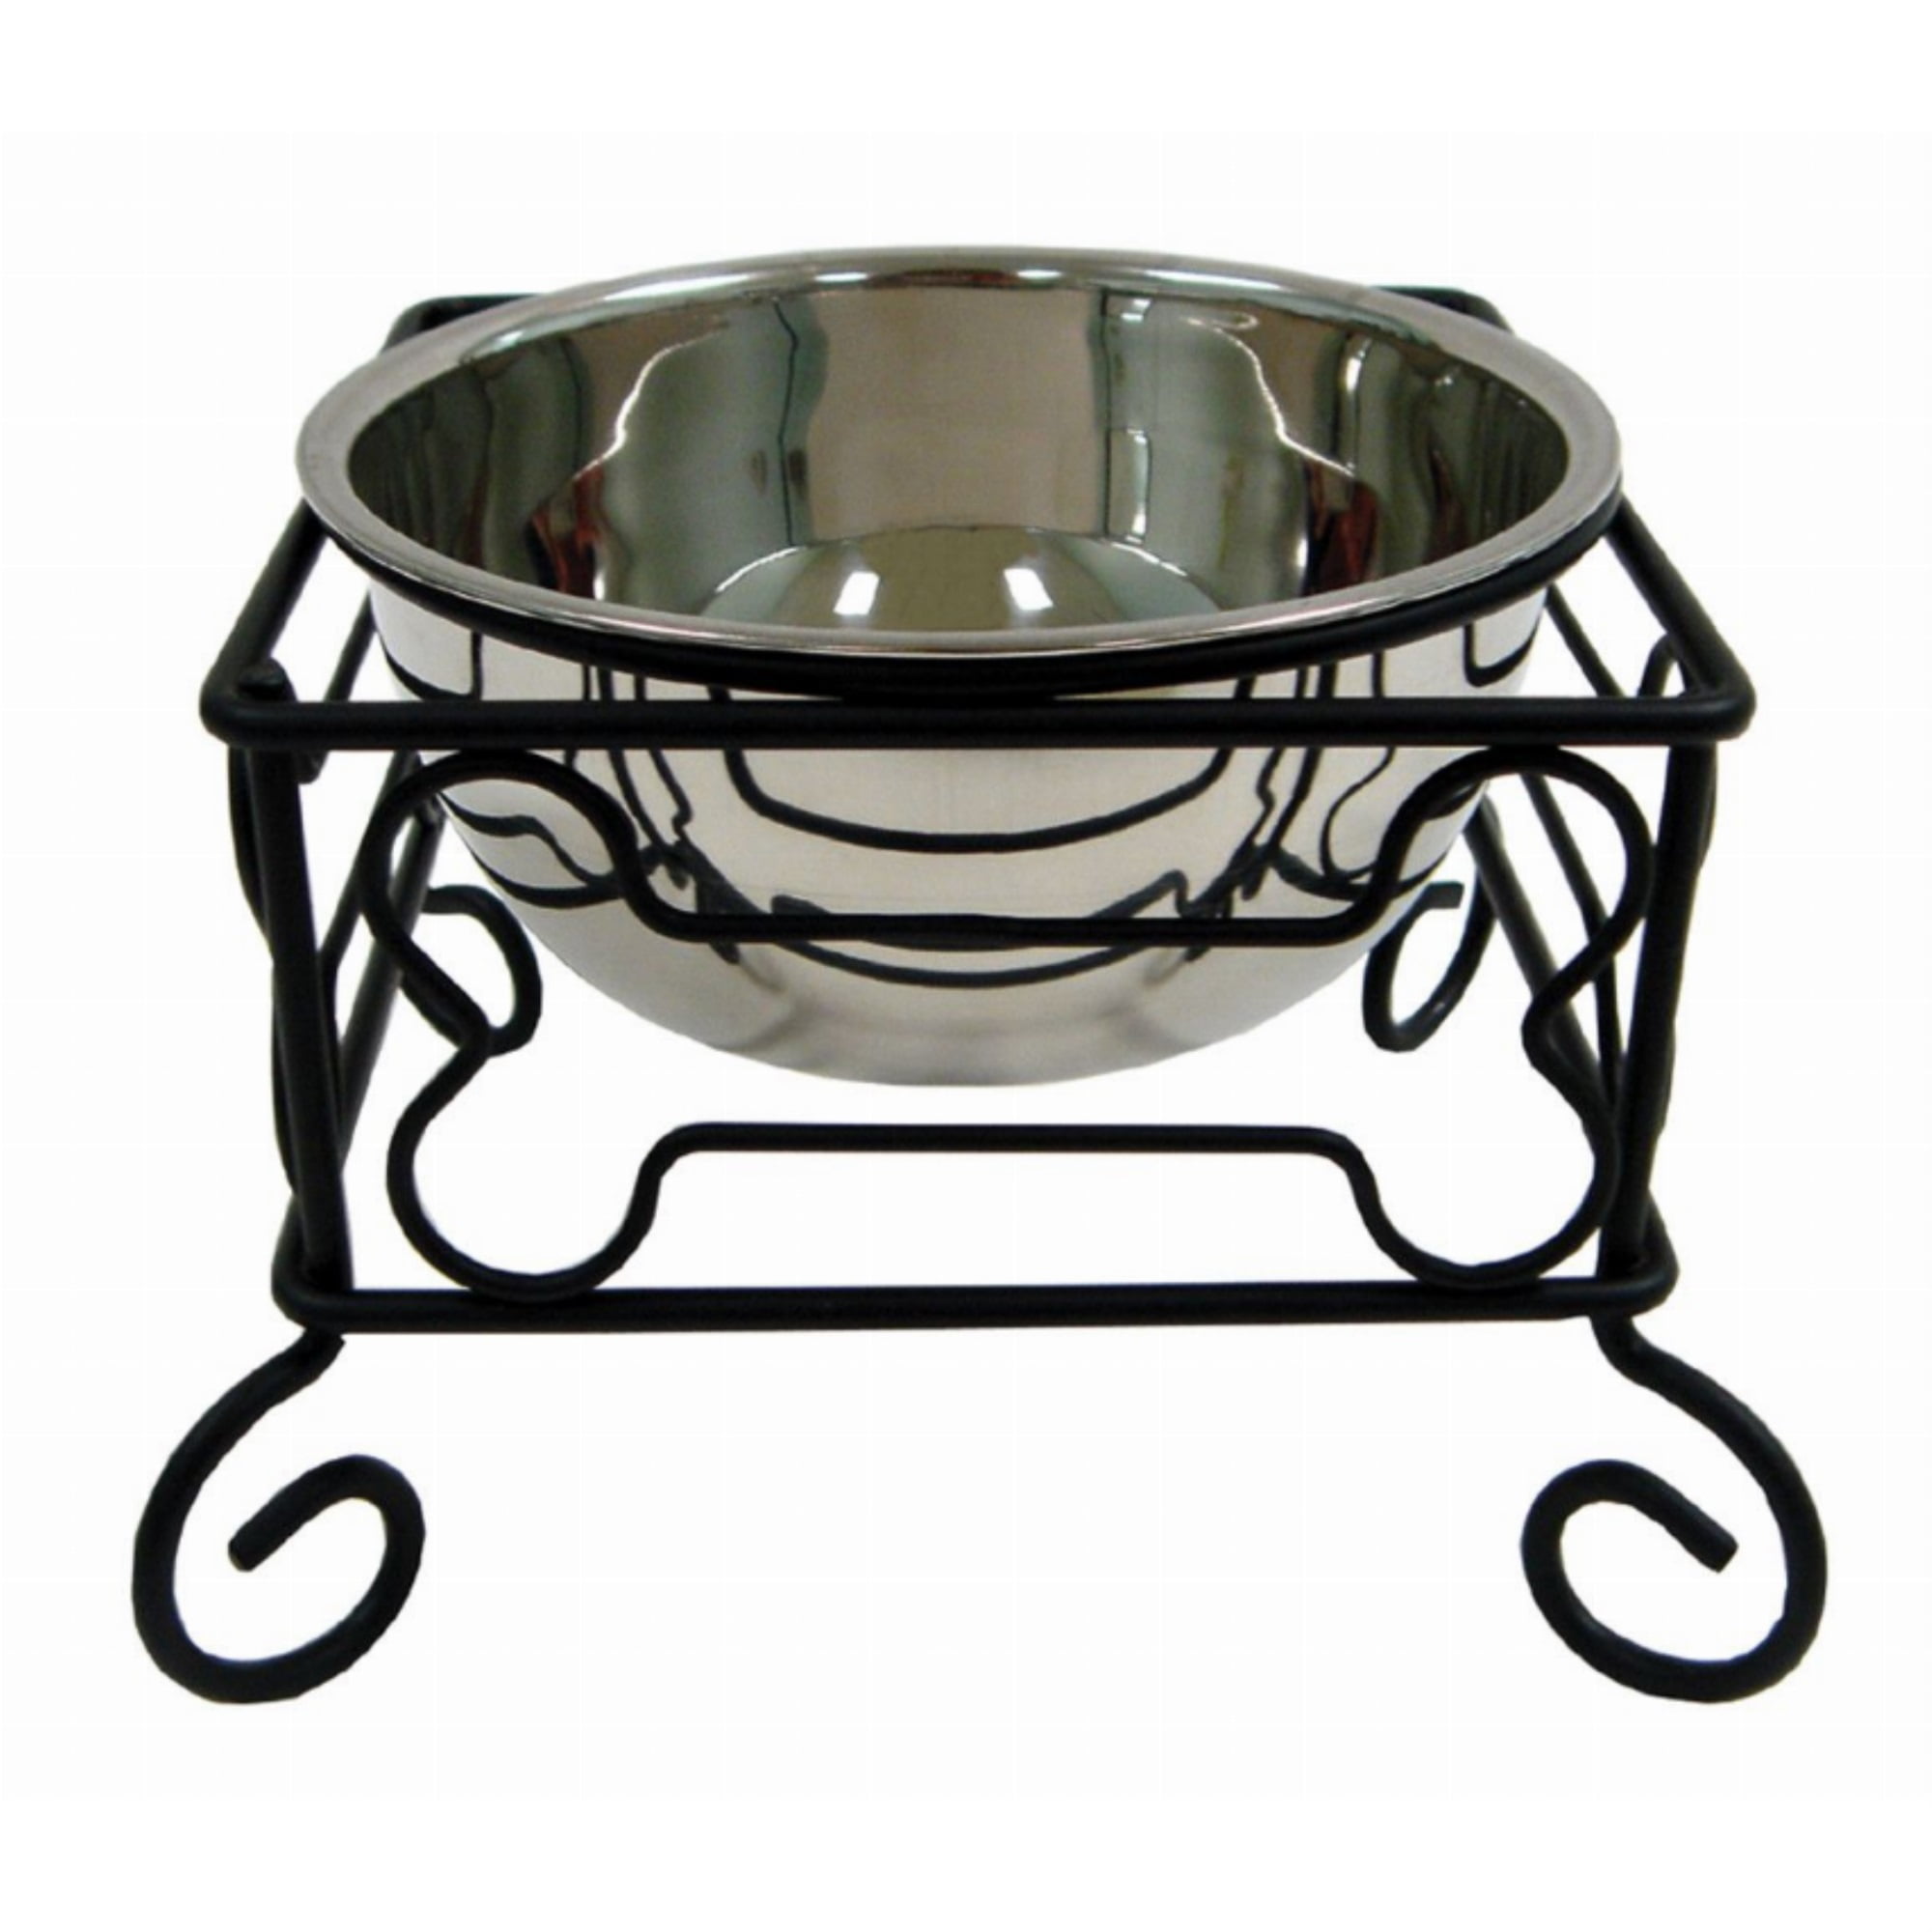 Baron. Wrought Iron Metal Elevated Dog Bowl Stand. S - L , XL Dog Feeding  Station, Best Raised Food, Water Bowl Stand, 2 Bowl Feeder